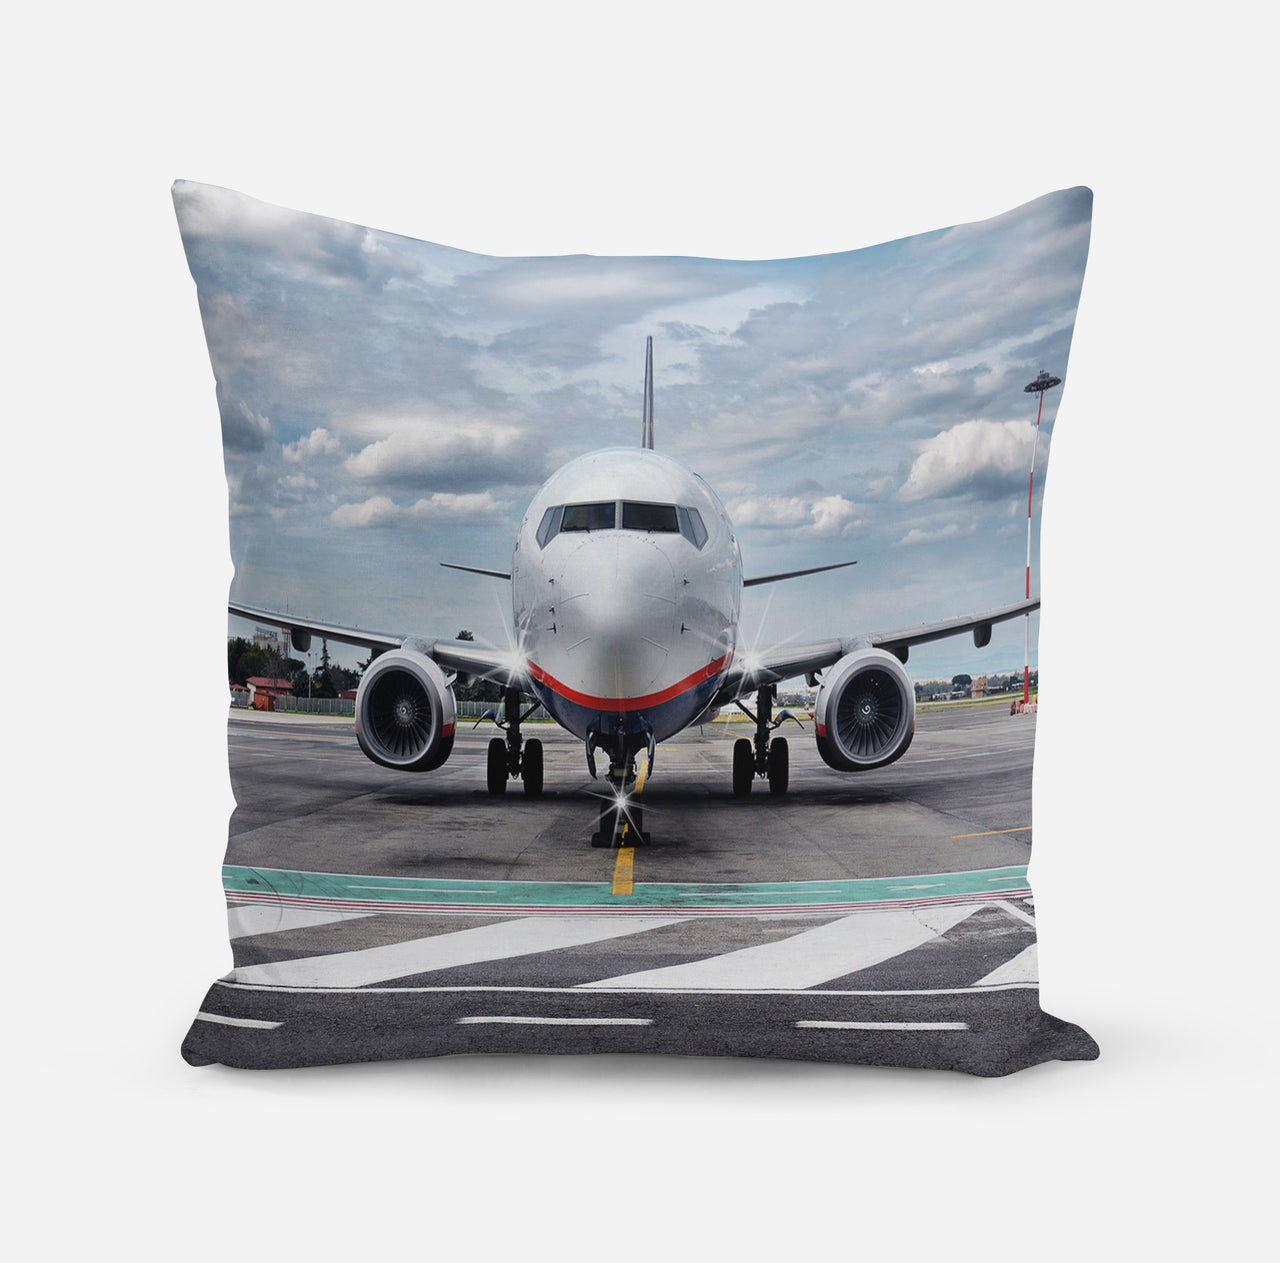 Amazing Clouds and Boeing 737 NG Designed Pillows